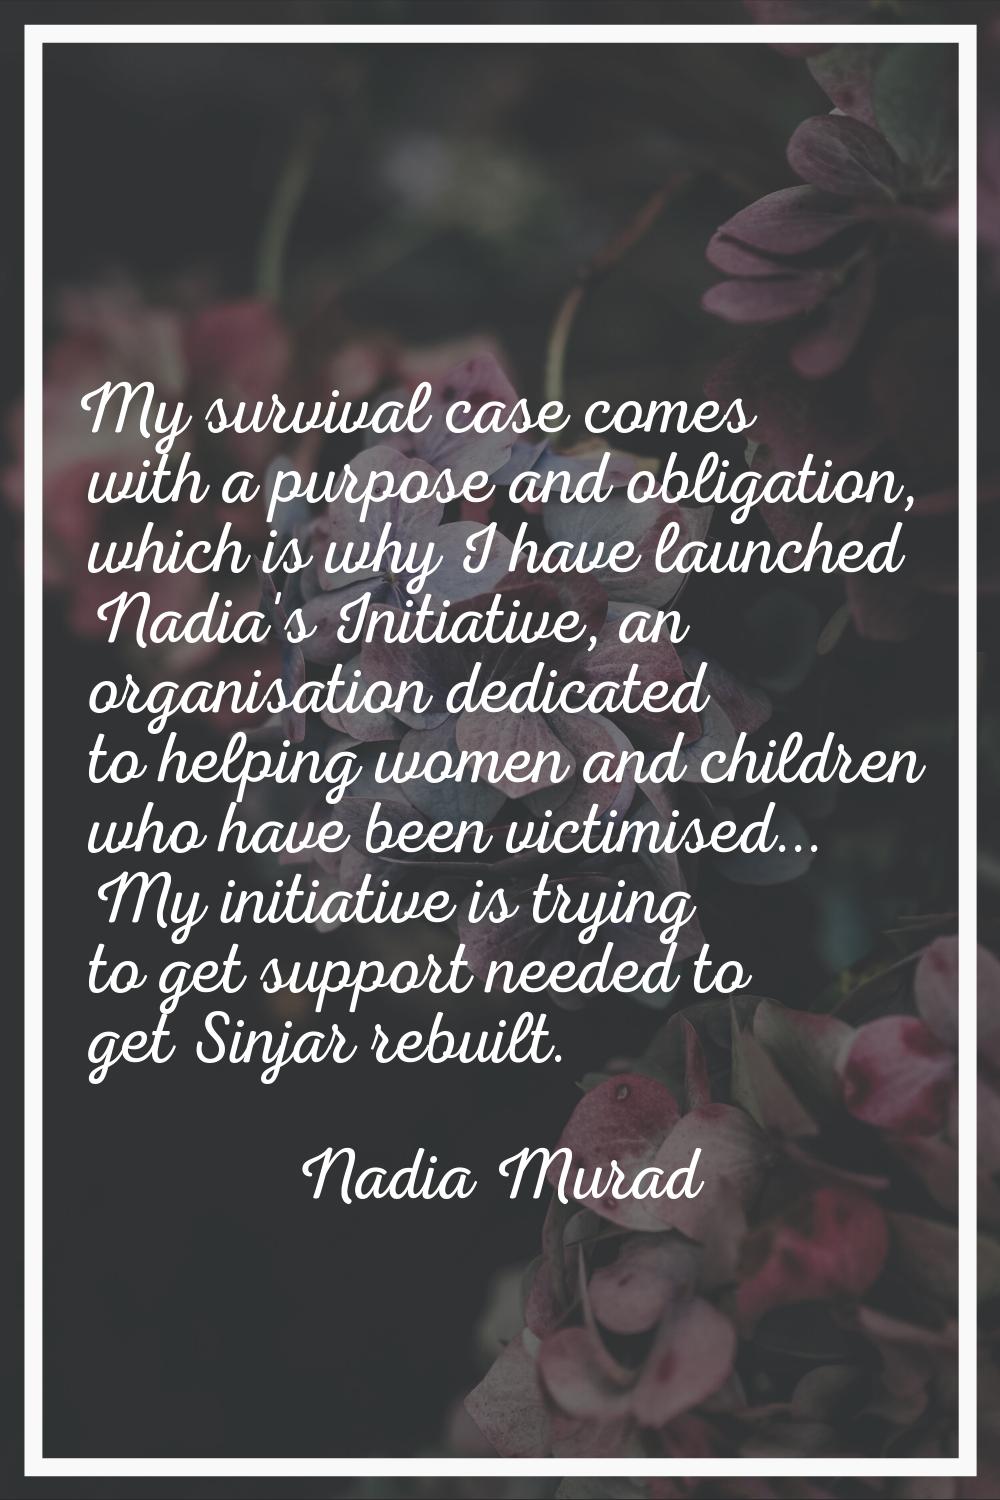 My survival case comes with a purpose and obligation, which is why I have launched Nadia's Initiati